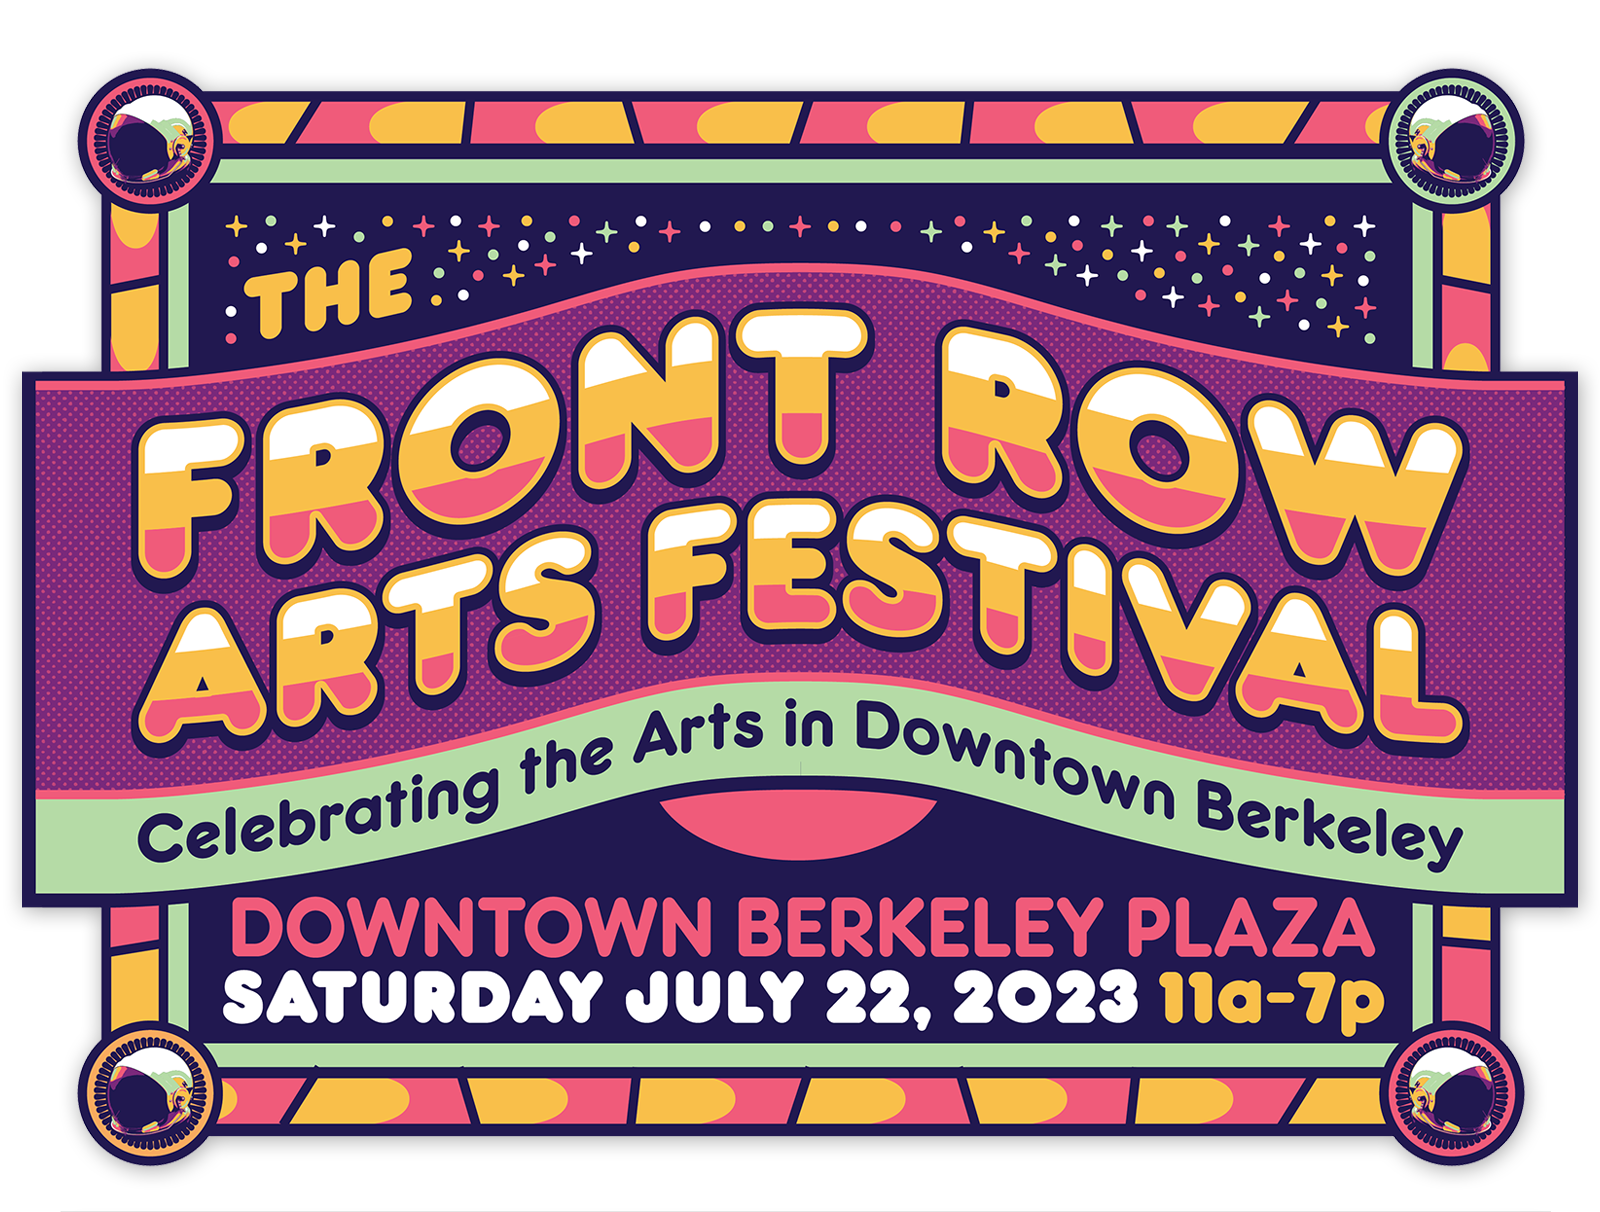 Marquee sign for Berkeley's 2023 Front Row Festival